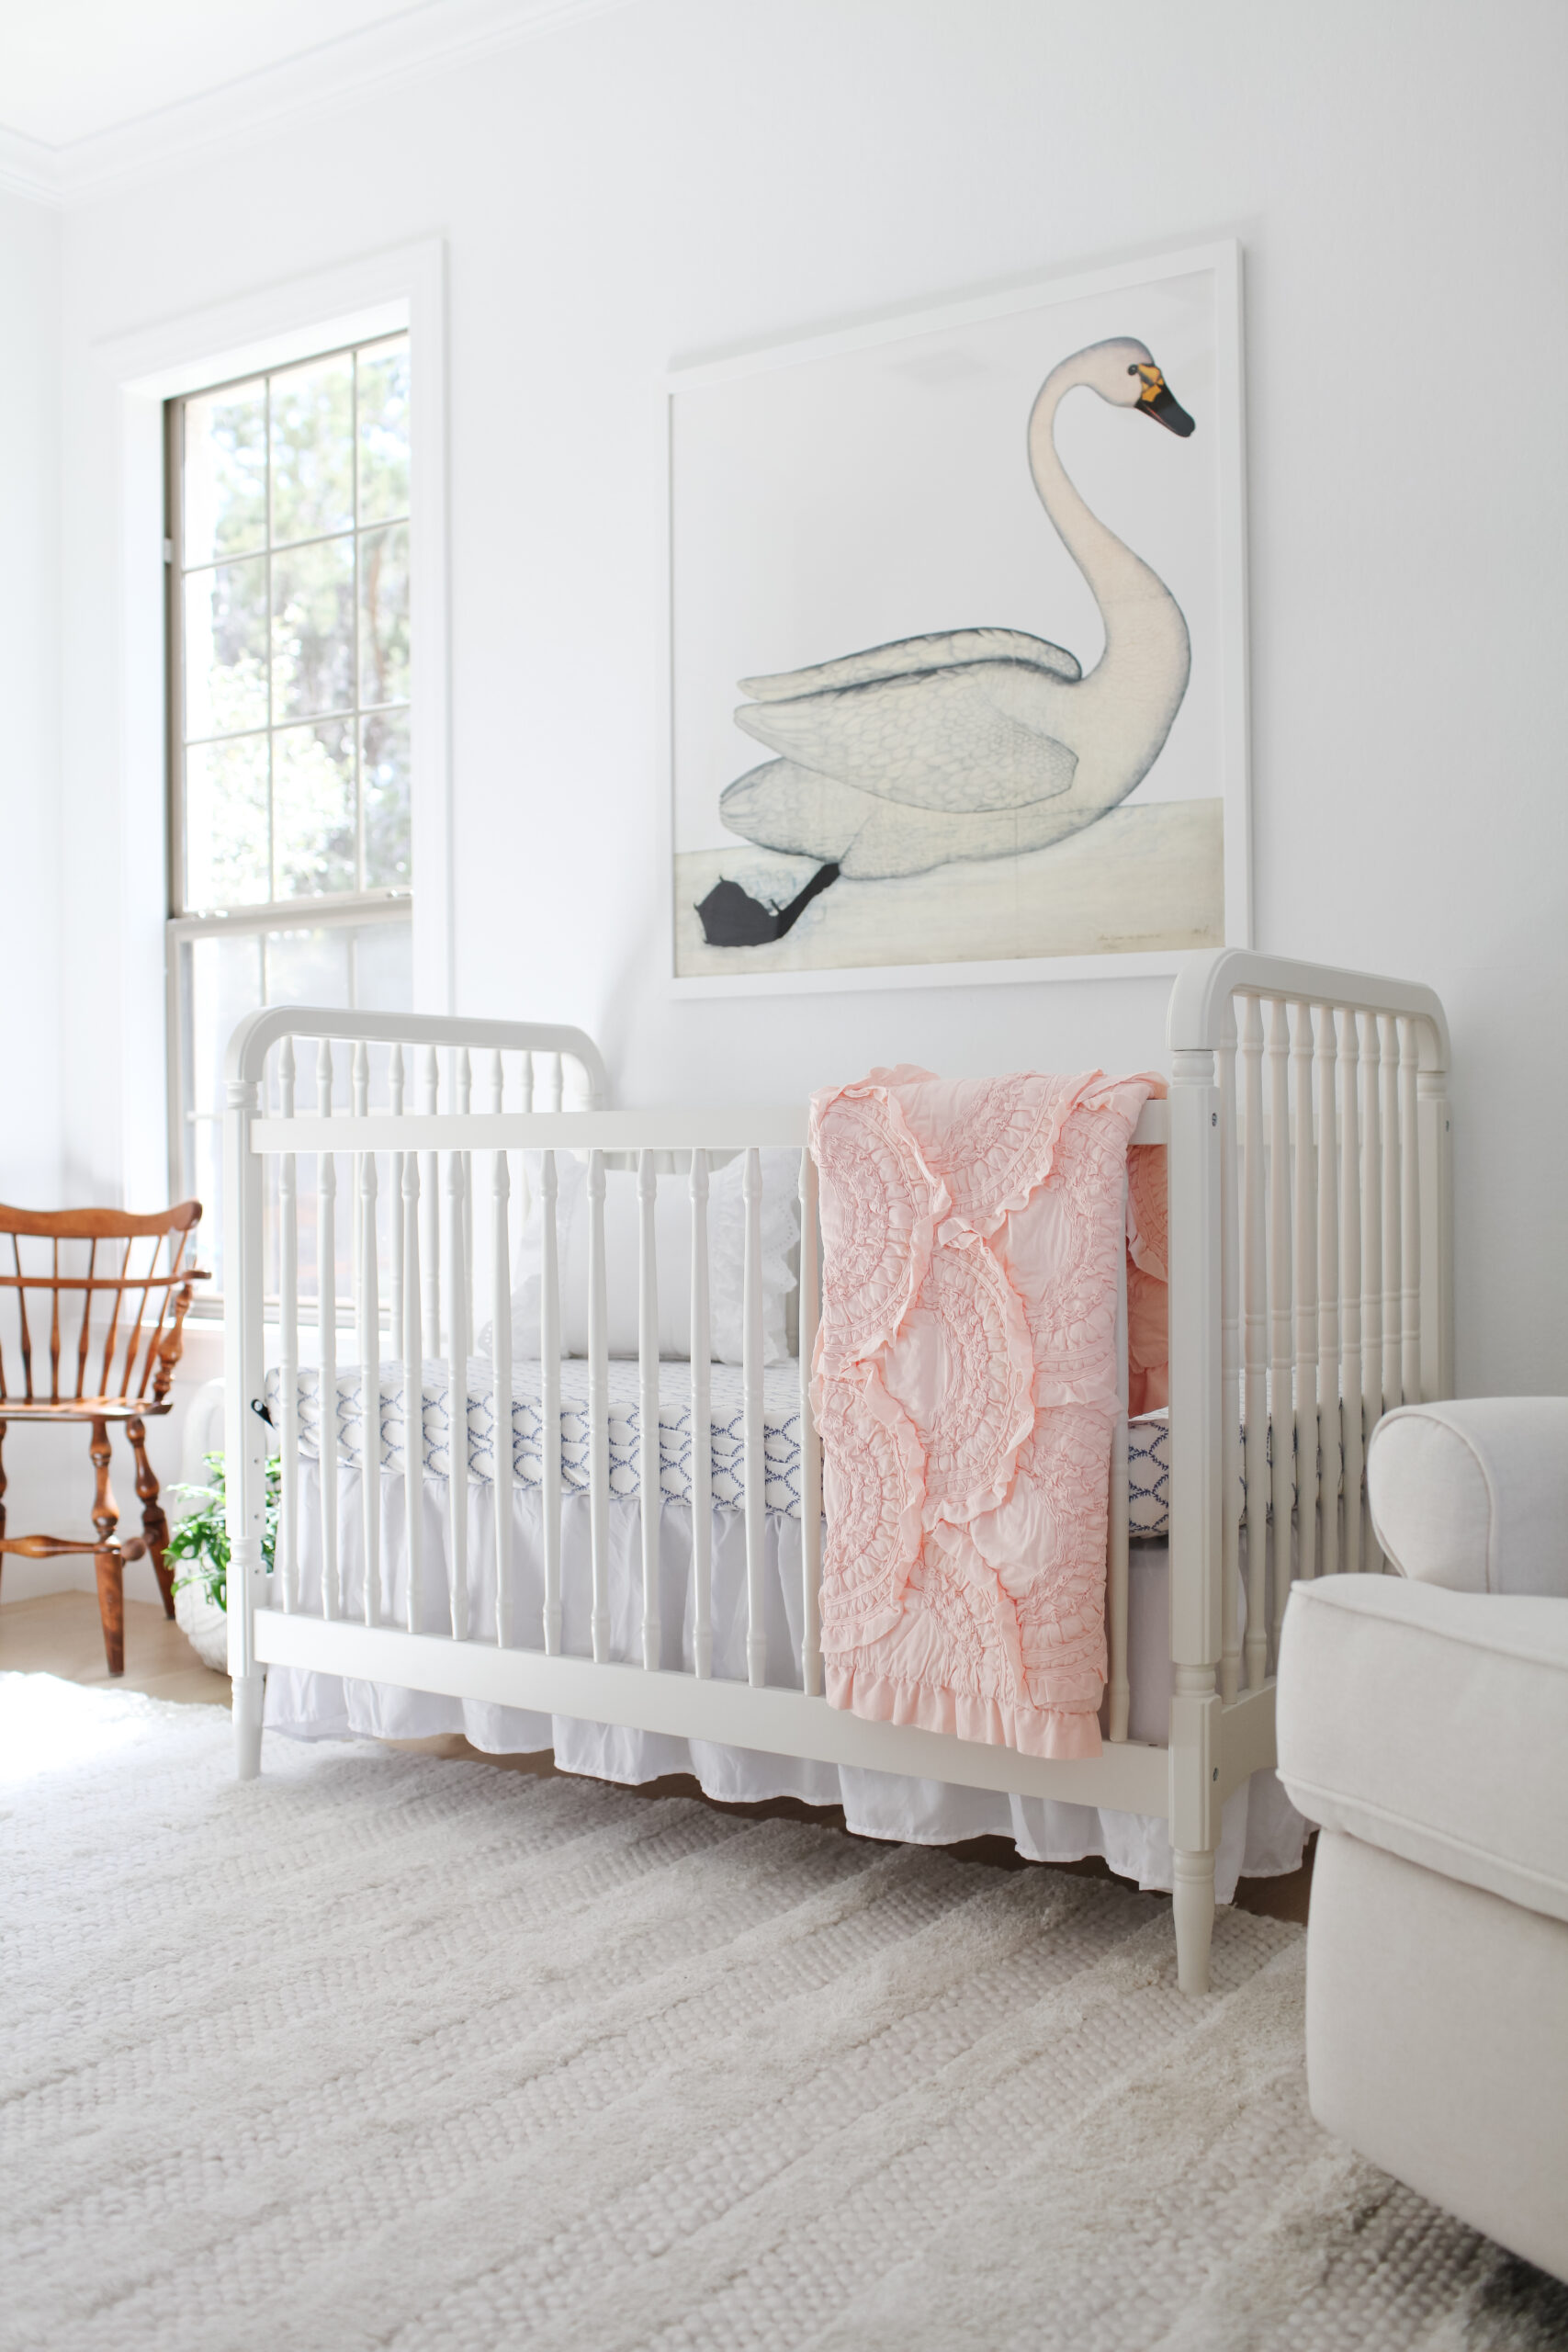 baby girl room wall swan art, crib, rifle paper company blue and white crib sheet, Anthropologie toddler rivulets quilt, vintage chair.